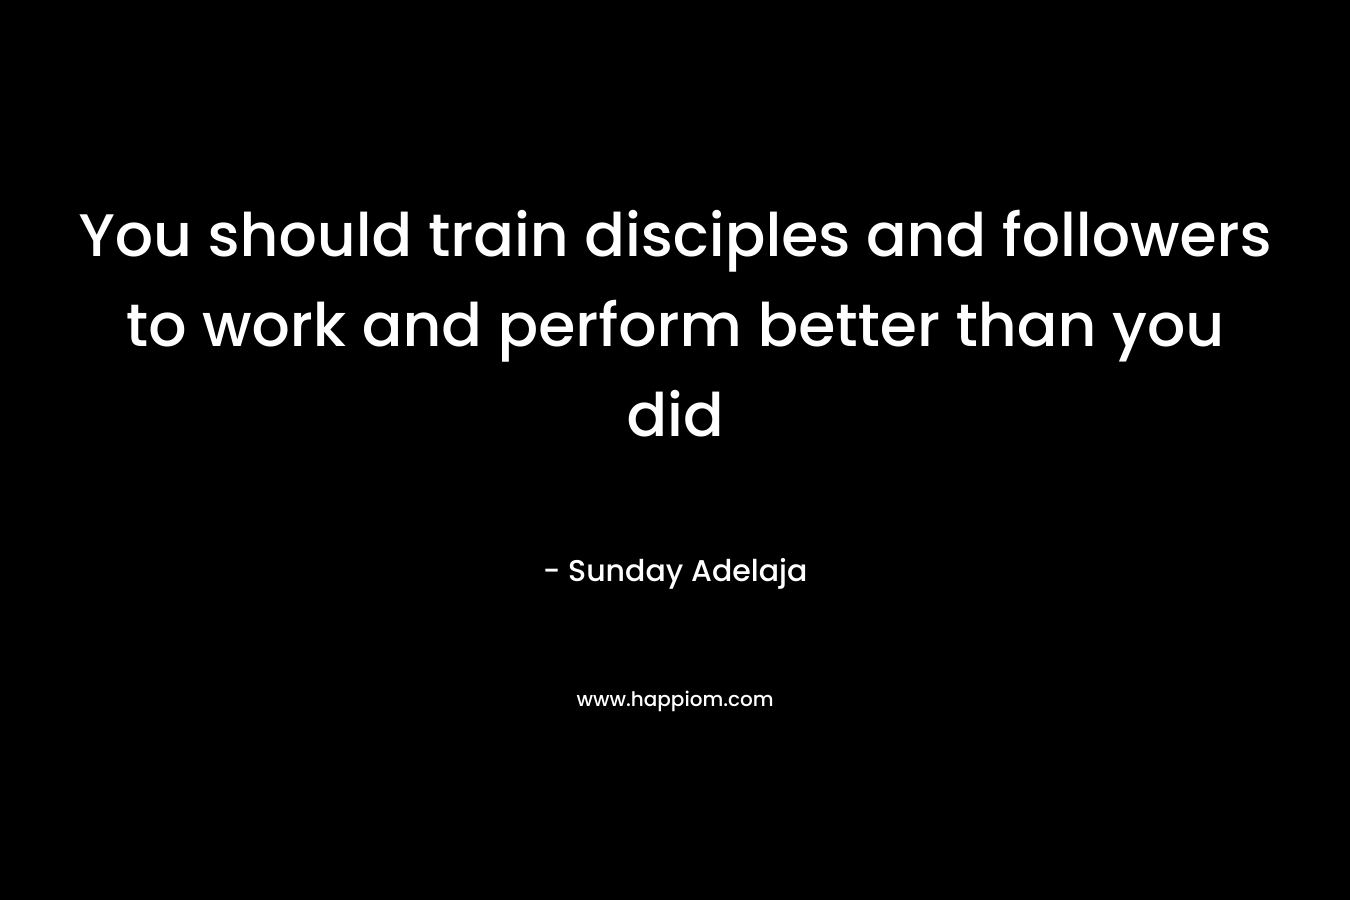 You should train disciples and followers to work and perform better than you did